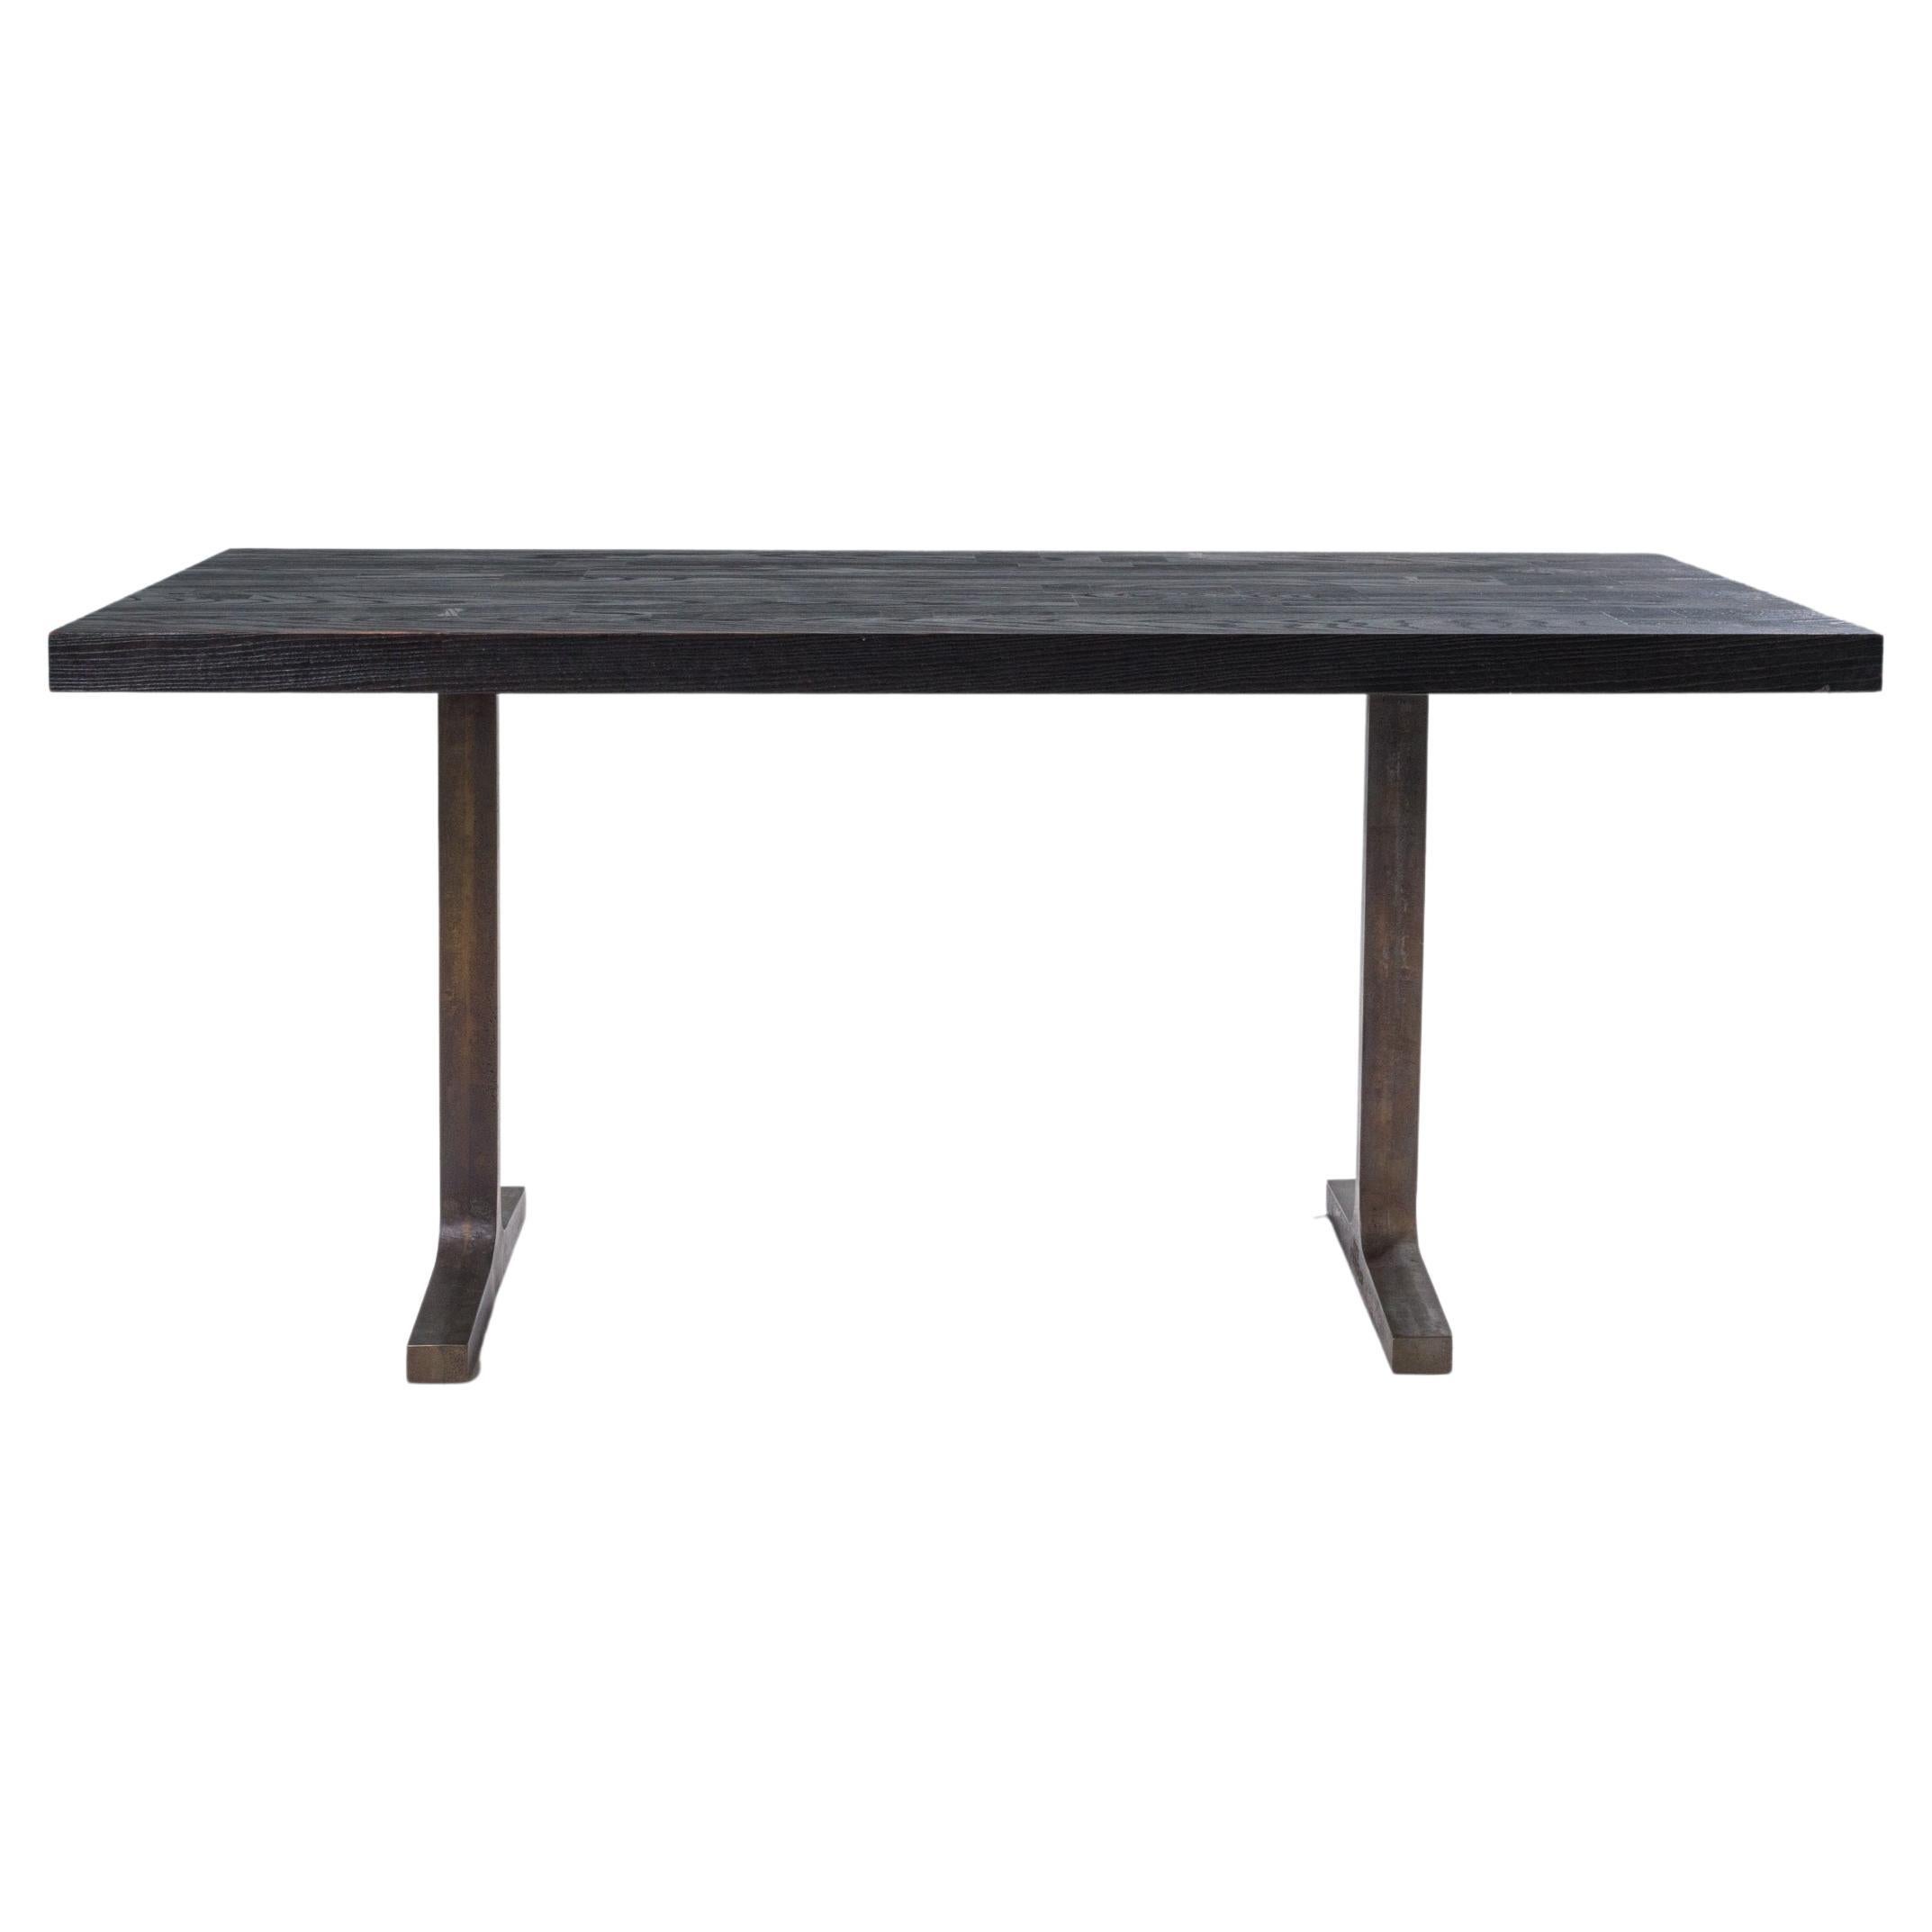 BDDW by Tyler Hays Cast Bronze and Dark Oiled Walnut Trestle Dining Table, 2013